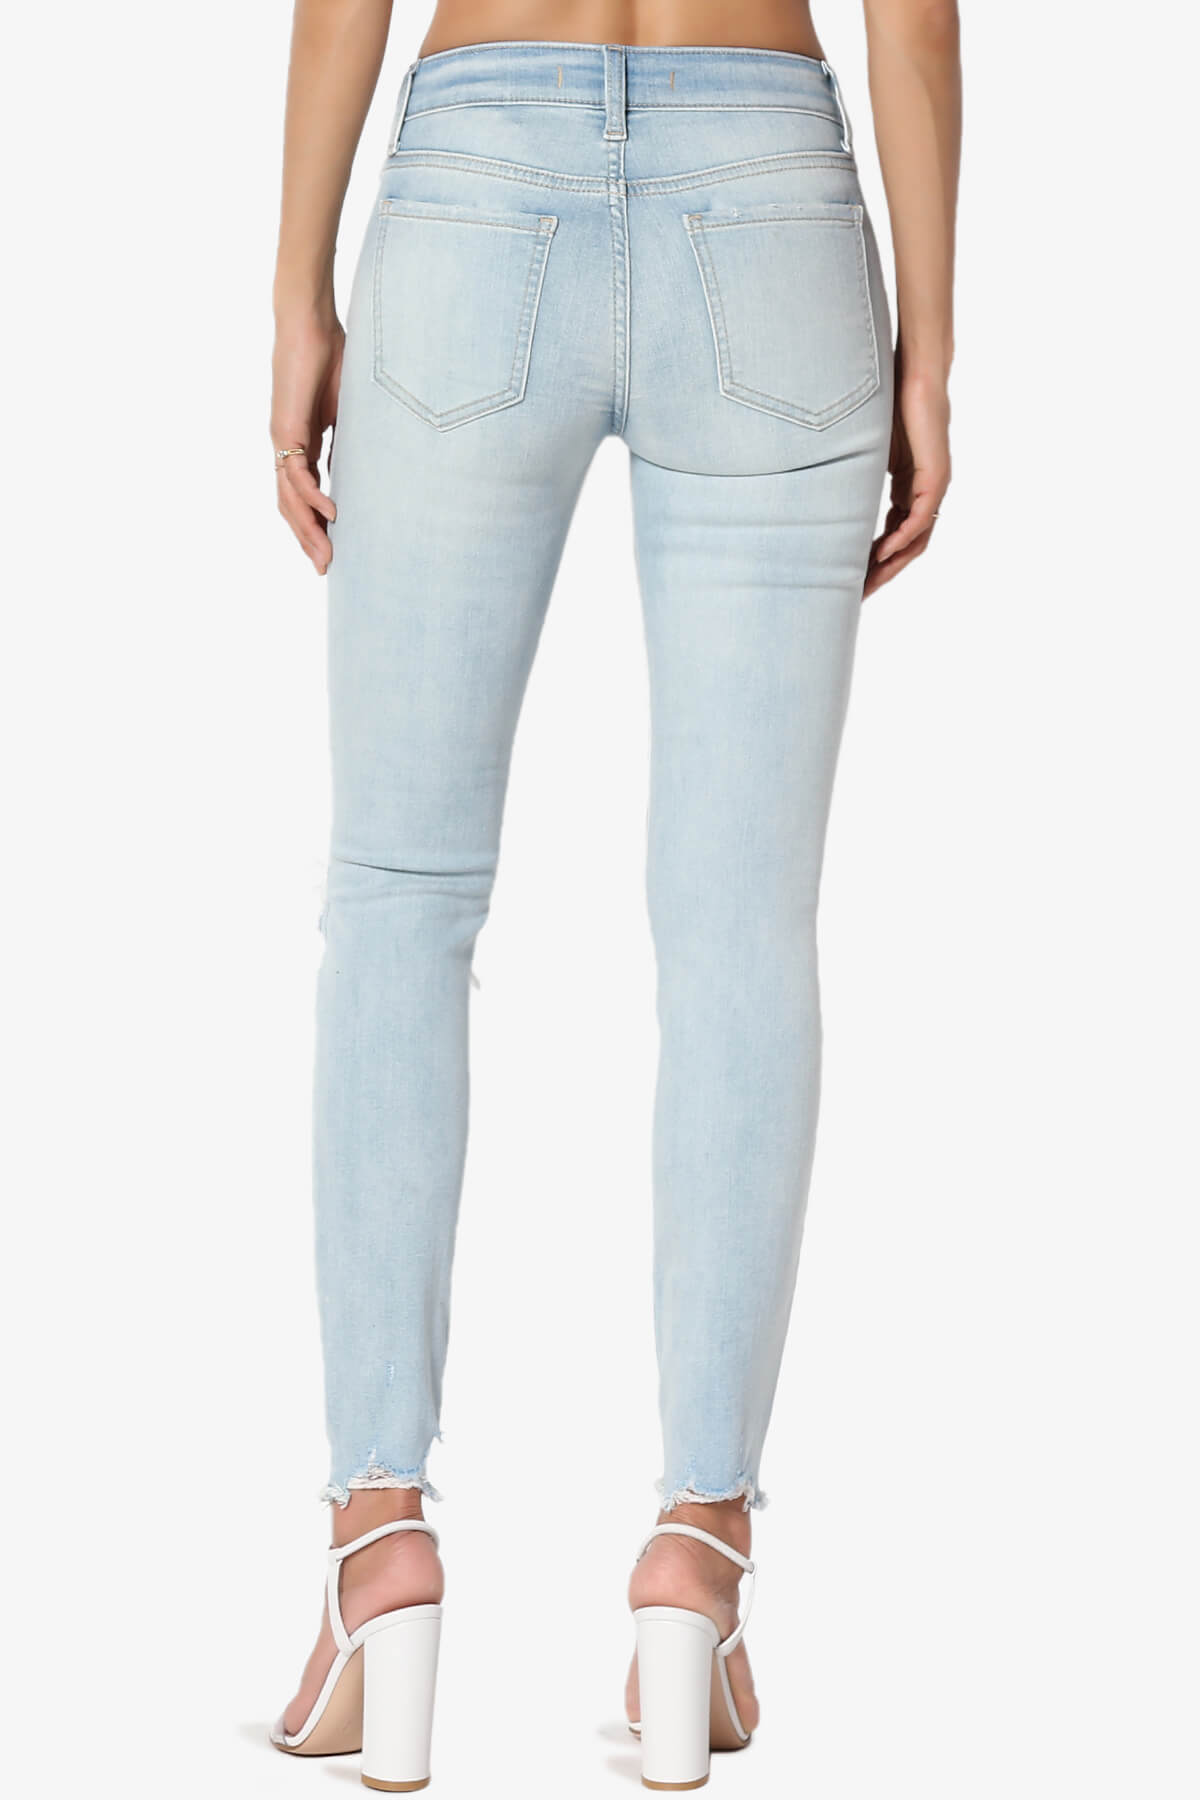 Load image into Gallery viewer, Josie Mid Rise Skinny Jeans in Cold Blooded LT LIGHT_2
